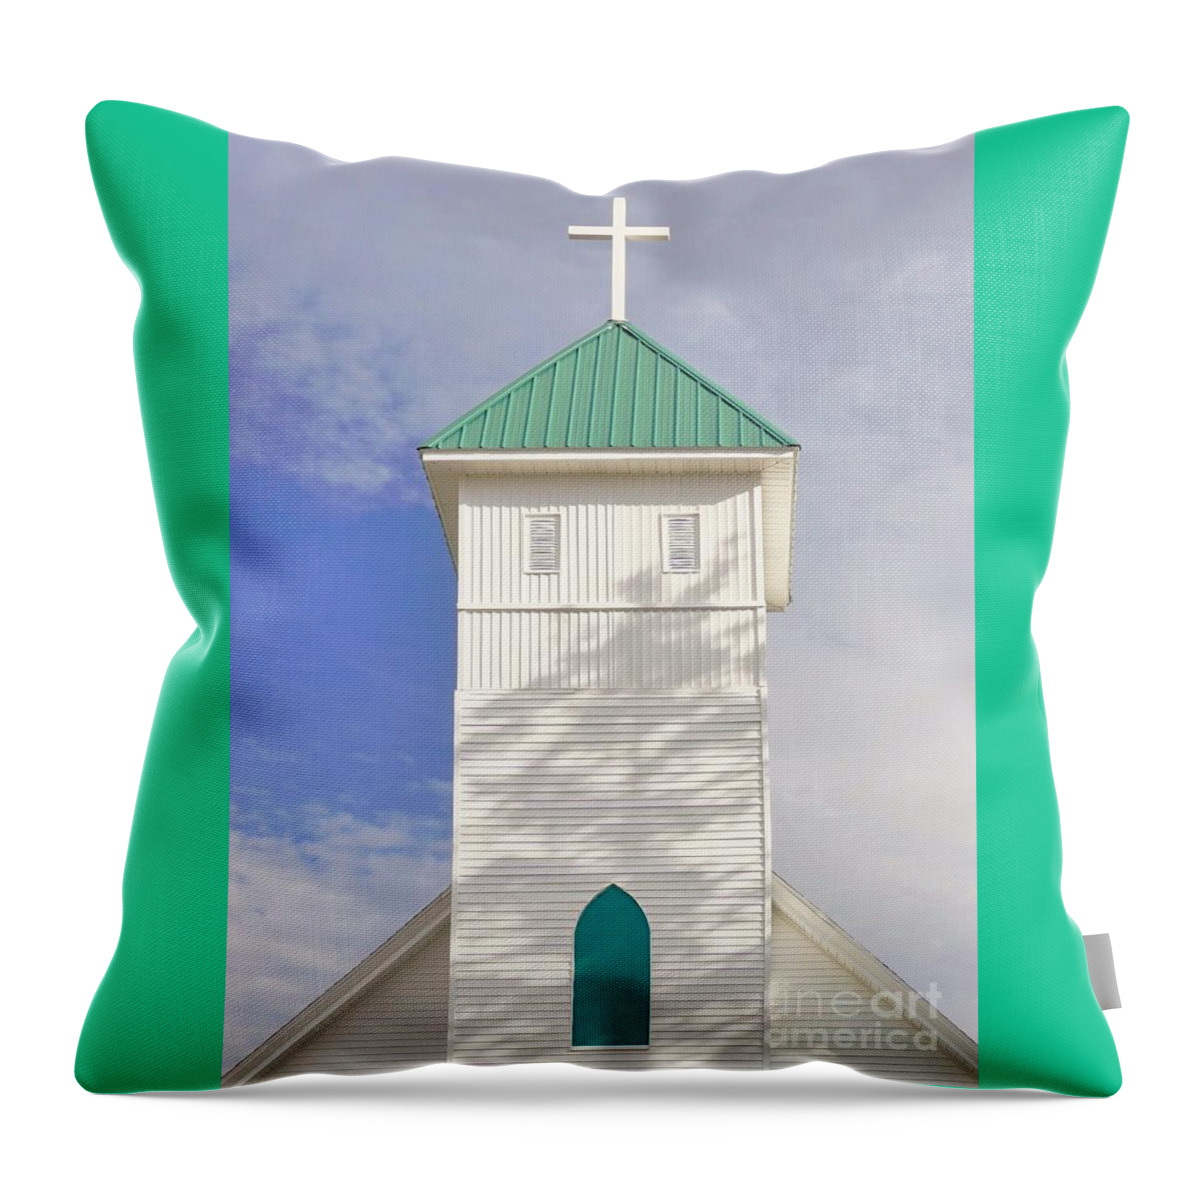 Steeple Throw Pillow featuring the photograph The Steeple by Merle Grenz